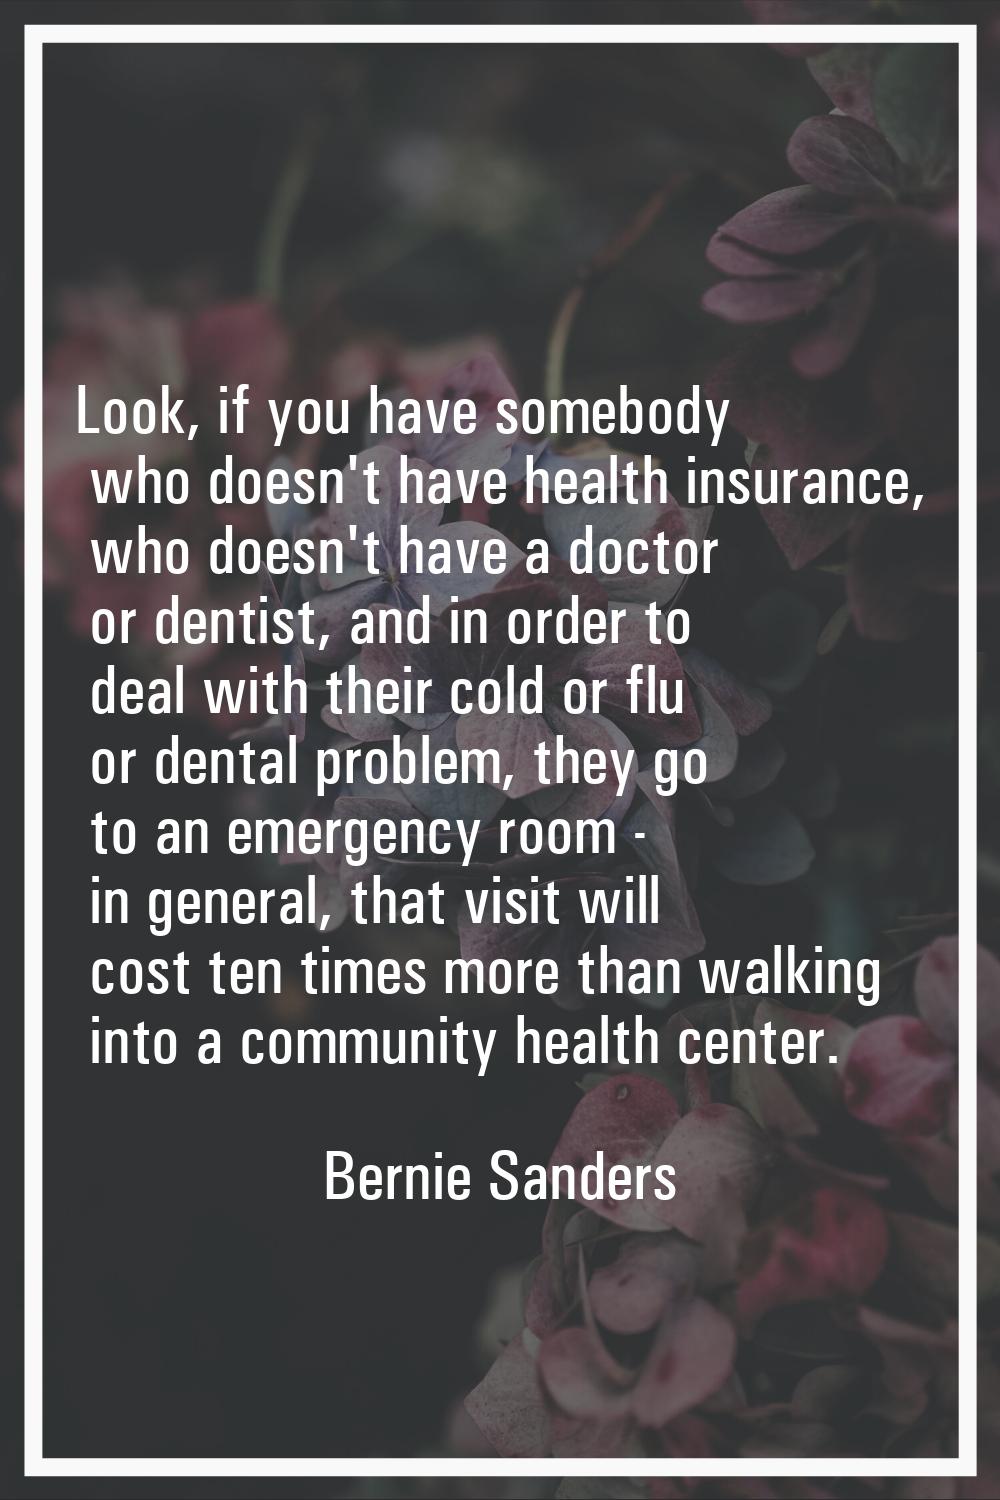 Look, if you have somebody who doesn't have health insurance, who doesn't have a doctor or dentist,